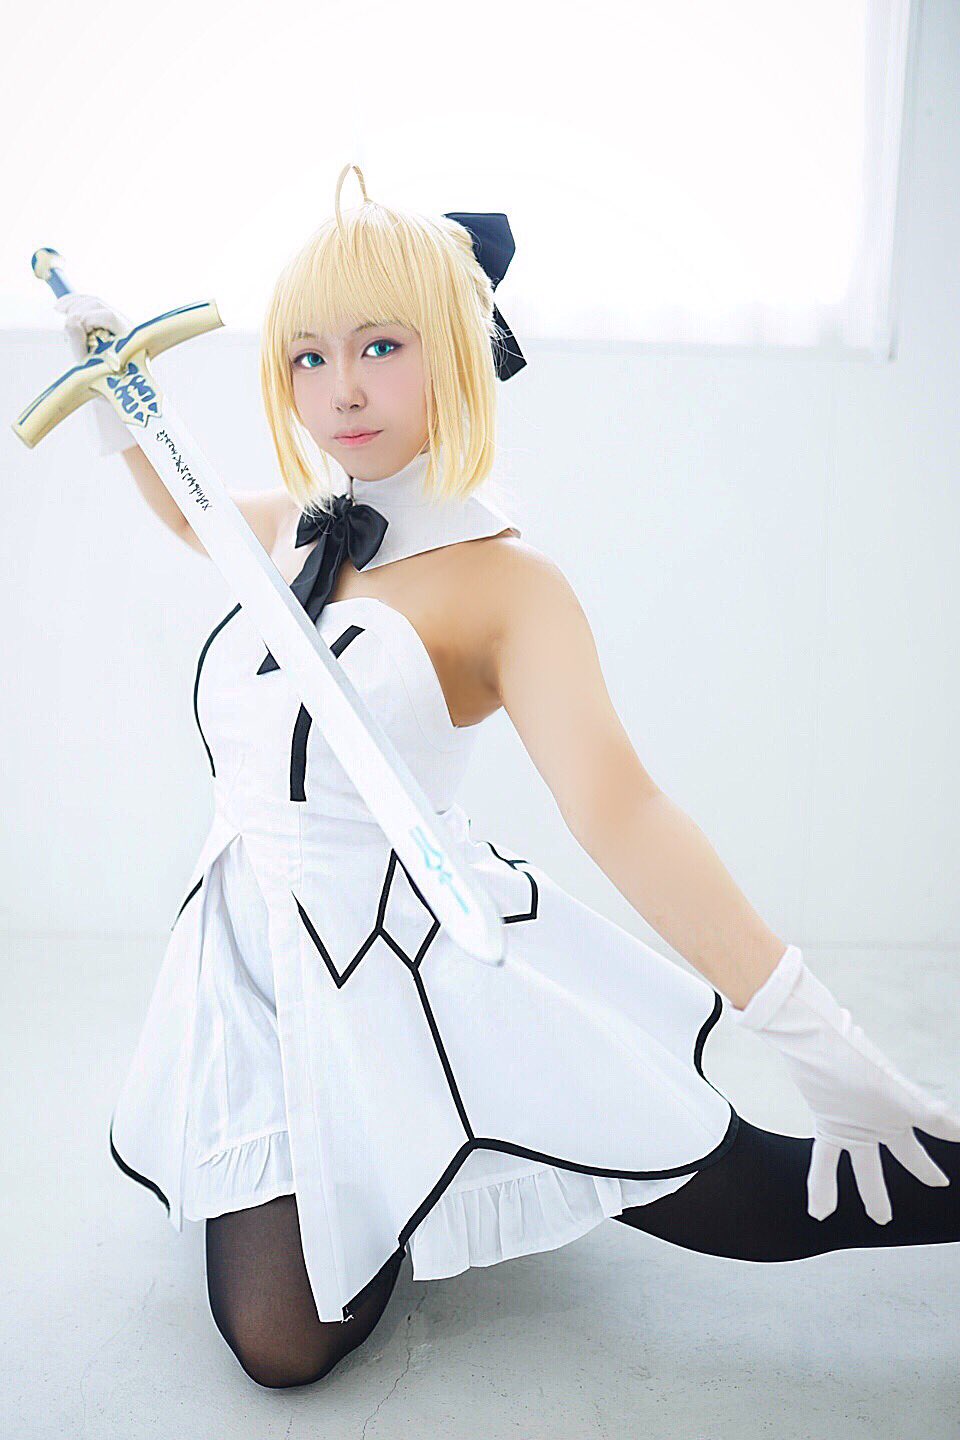 People 960x1440 Asian Japanese Japanese women women cosplay Fate series Fate/Unlimited Codes  Fate/Grand Order Artoria Pendragon Saber Lily blonde ponytail